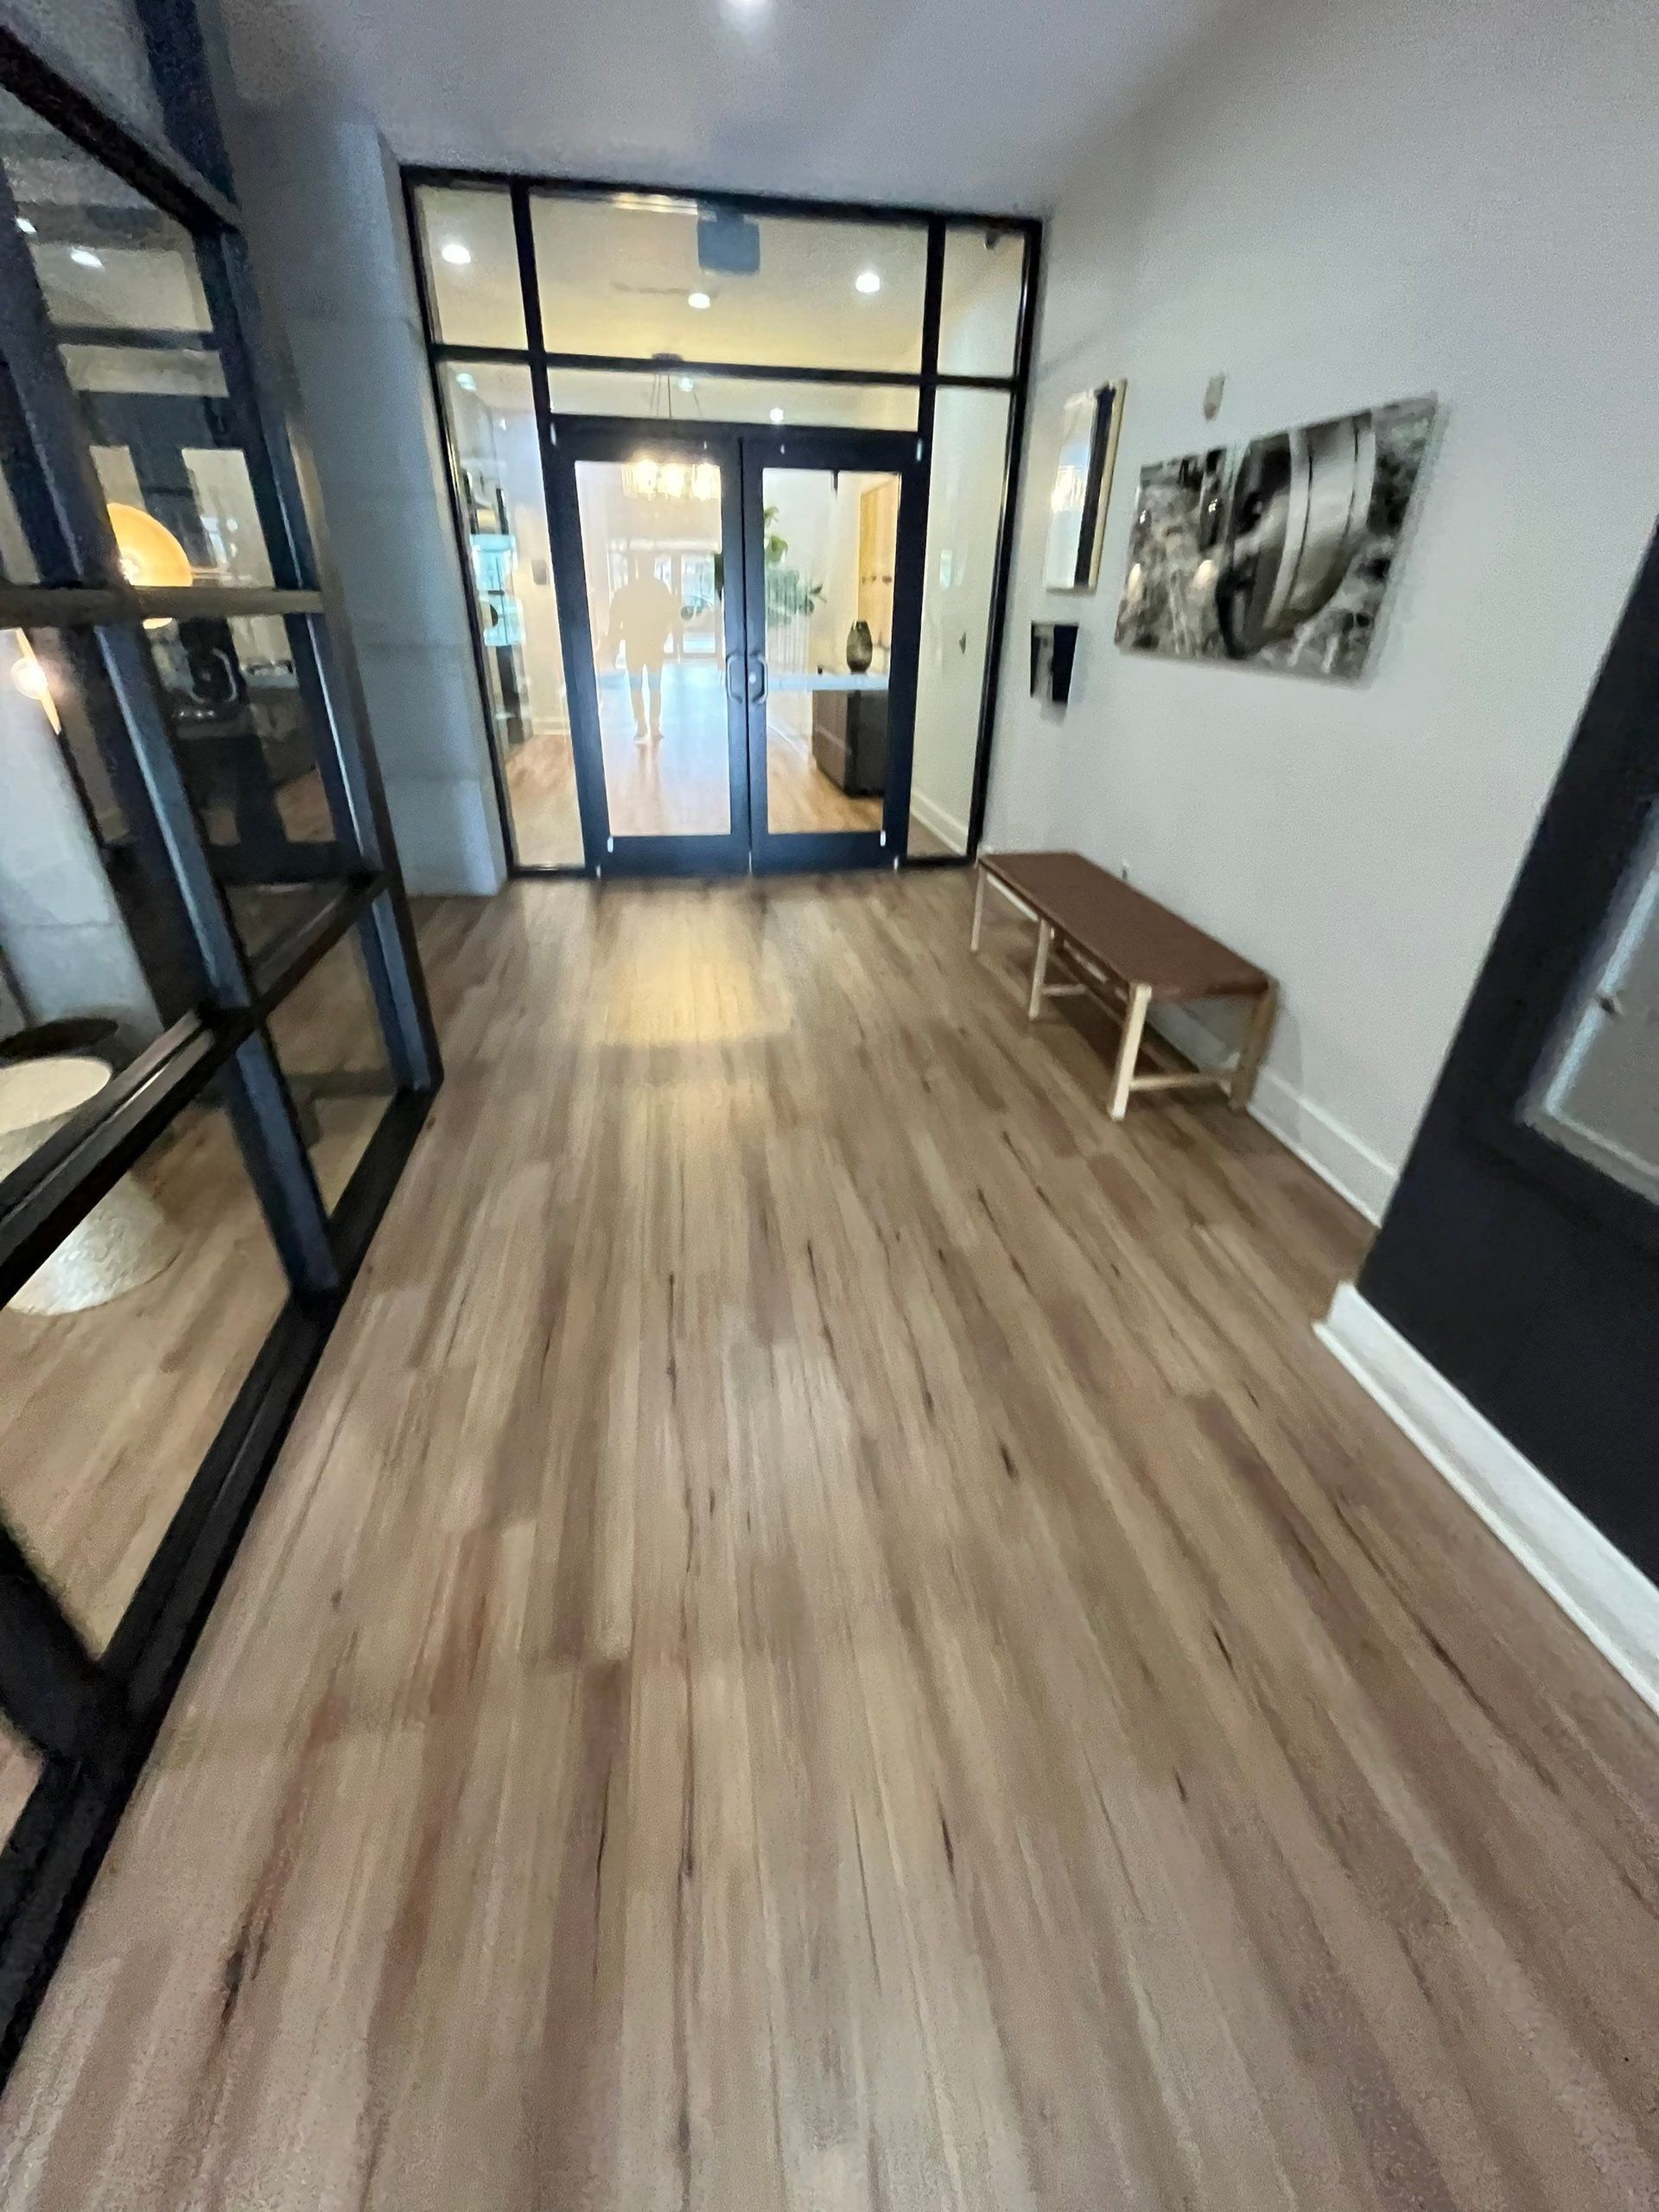 a hallway with wooden floors and a bench in the middle